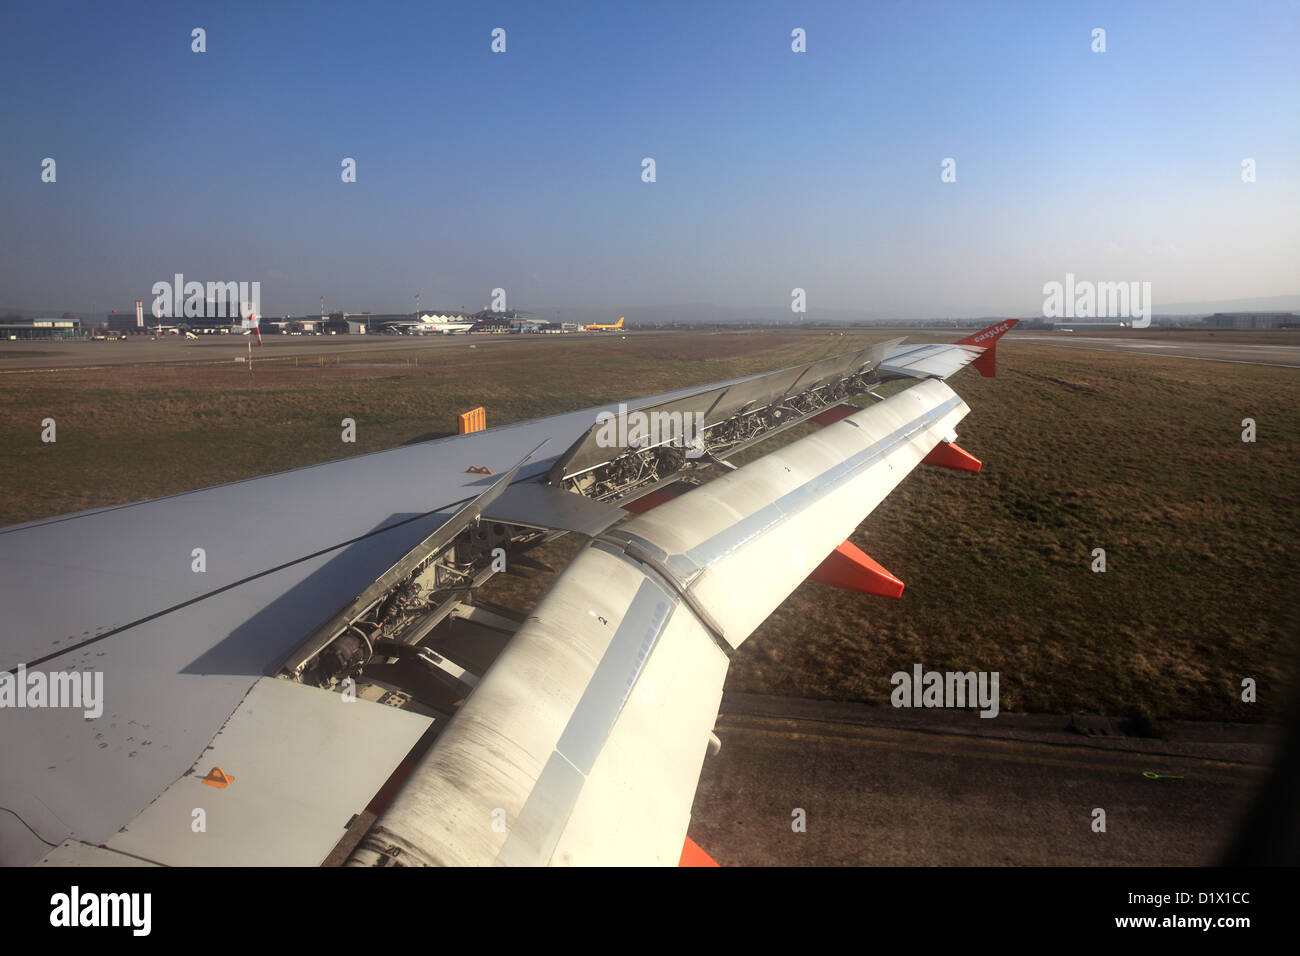 View from aeroplane window of Easyjet logo and wingtip Stock Photo